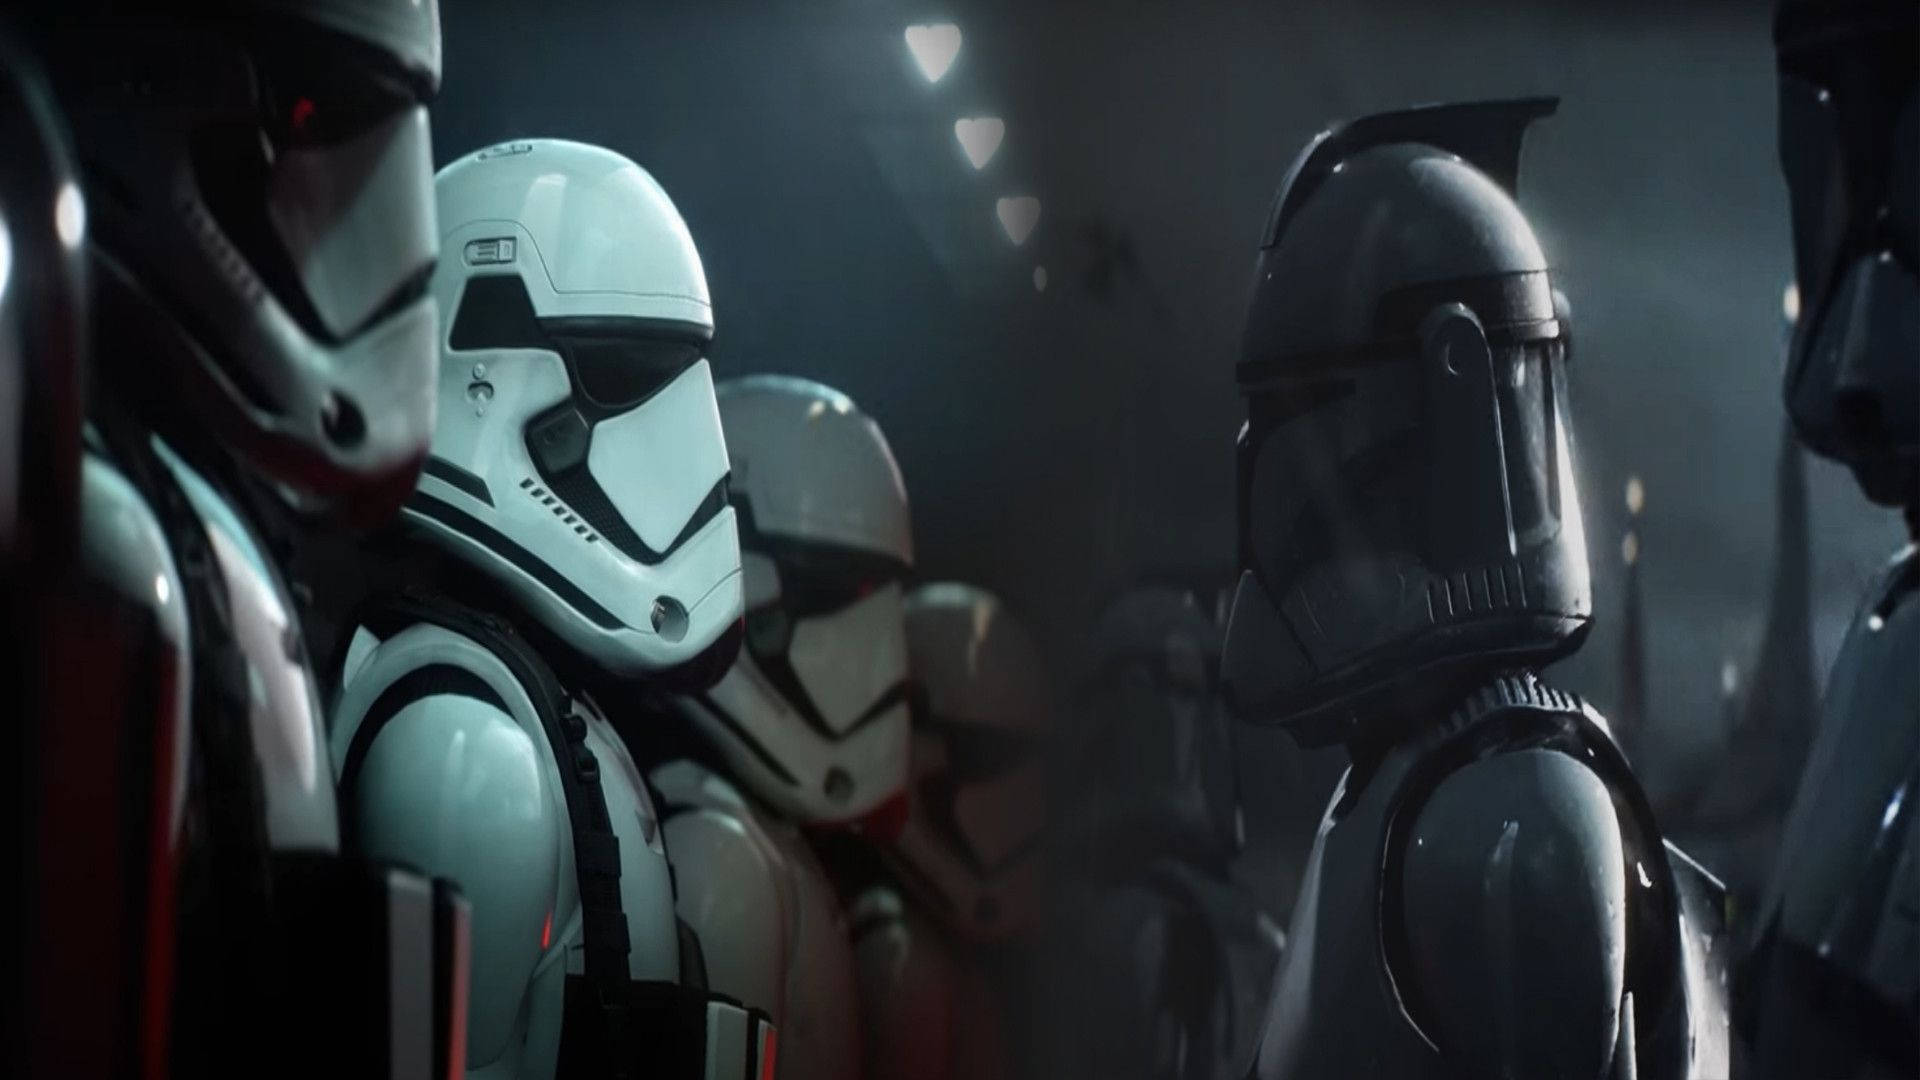 New Clone Troopers Lead the Charge of Star Wars Battlefront II Updates